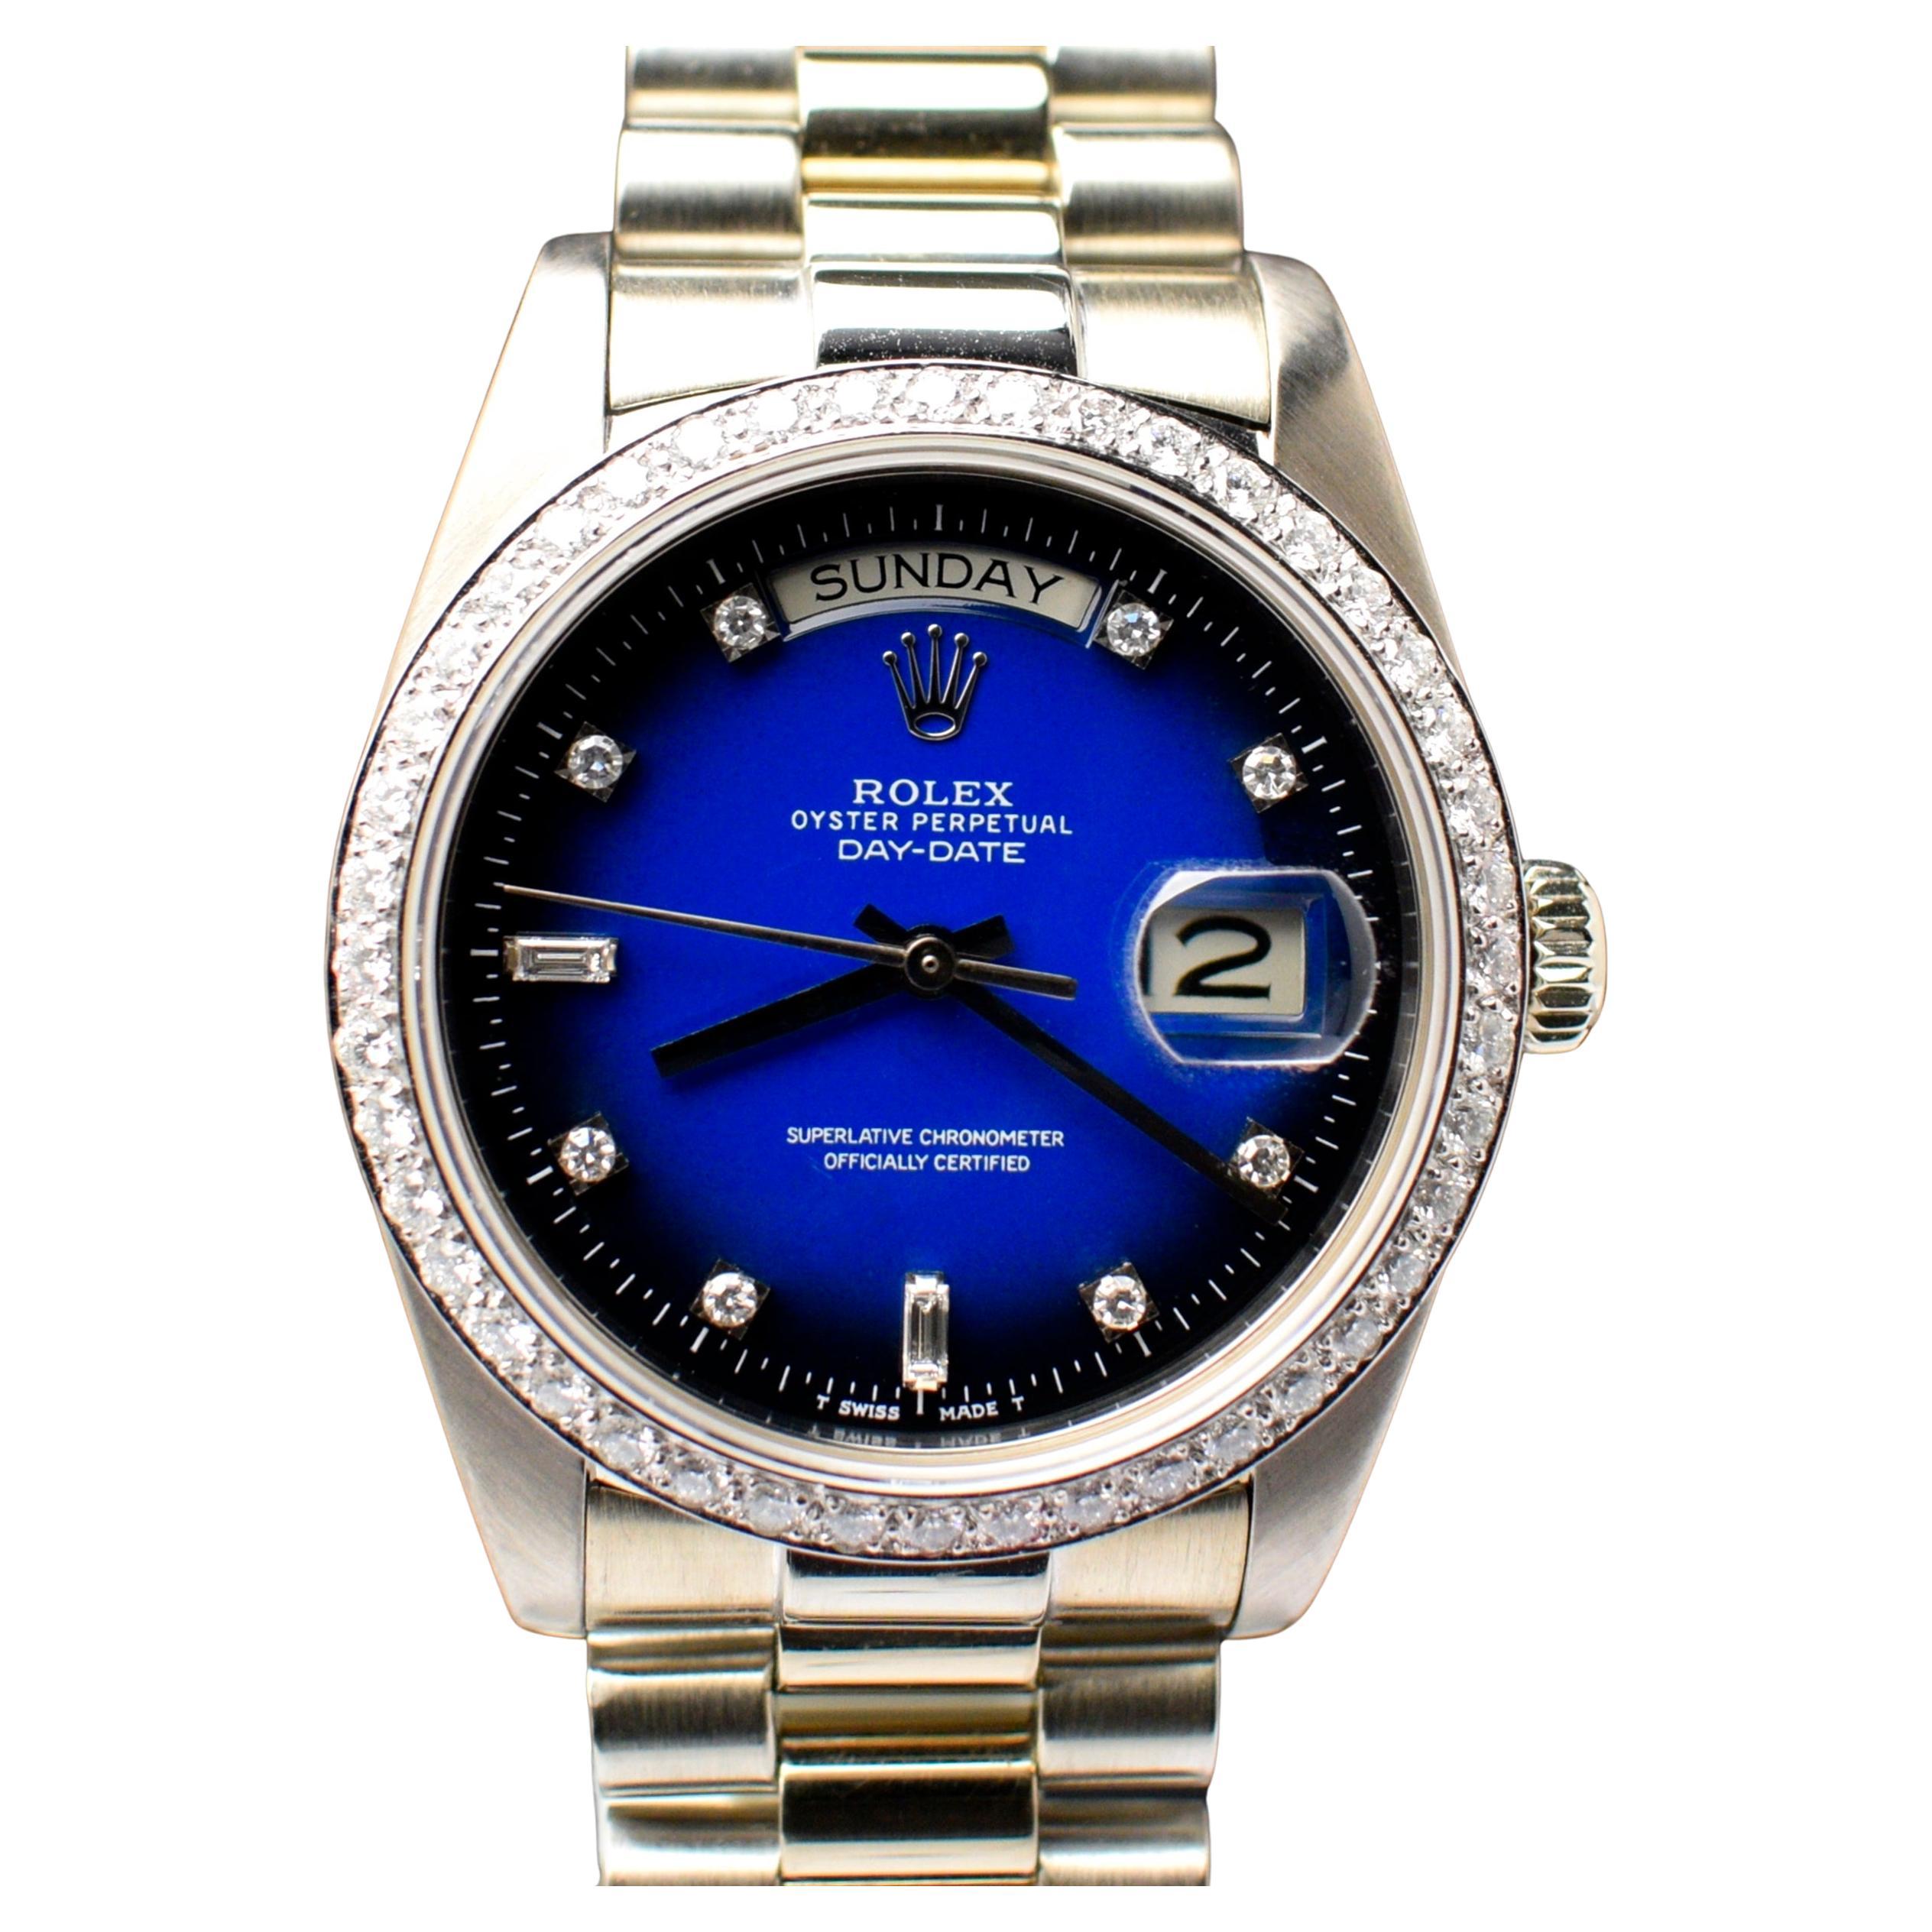 Rolex Day-Date 18K WG White Gold Ombre Blue Dial Diamond 18038 Auto Watch, 1982 For Sale